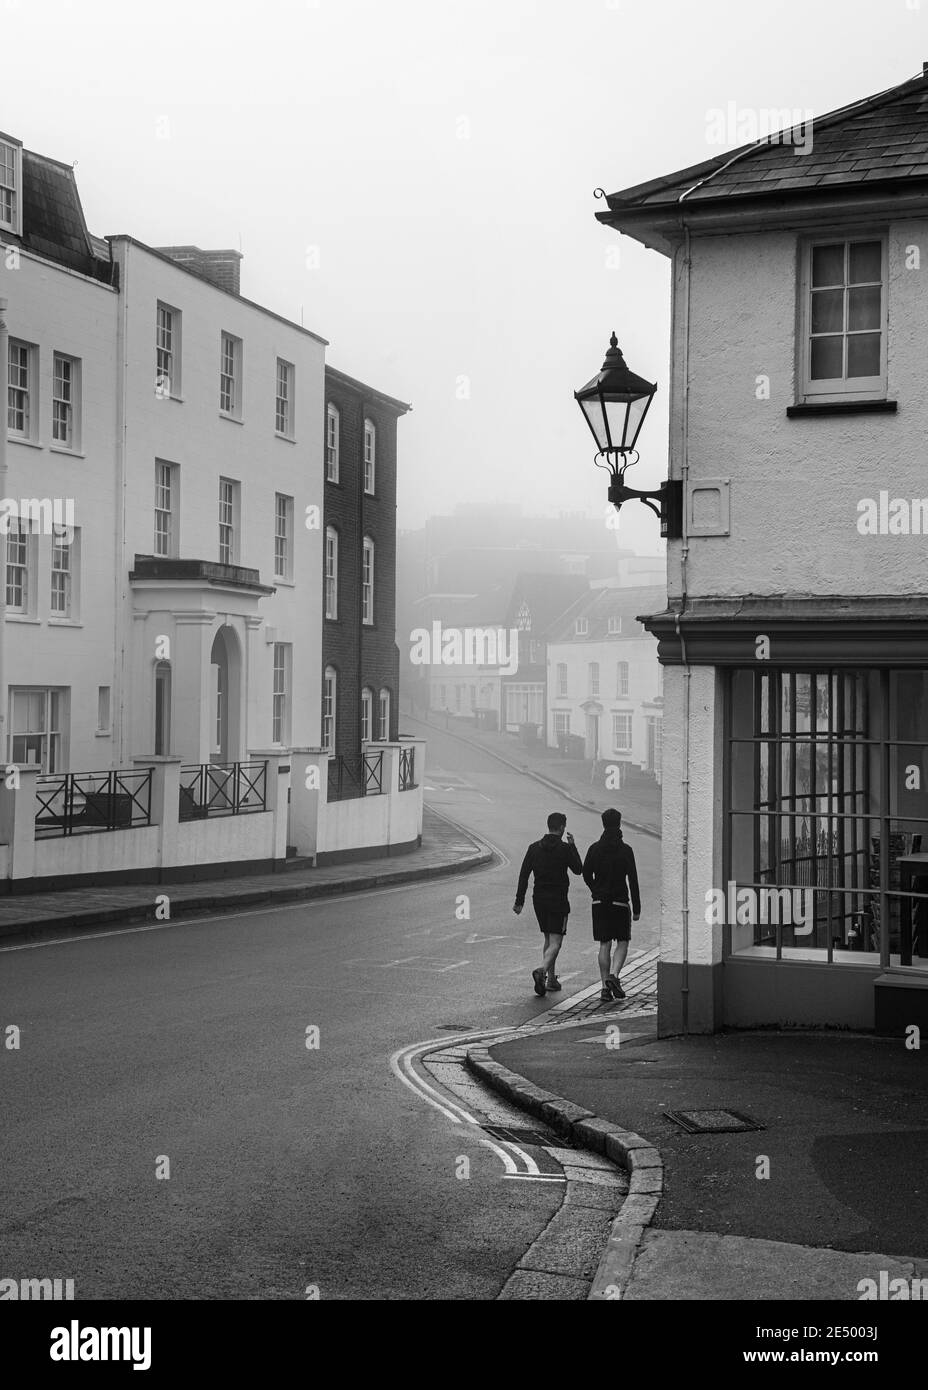 Harrow on the Hill Hight Street view in a foggy morning, England Stock Photo